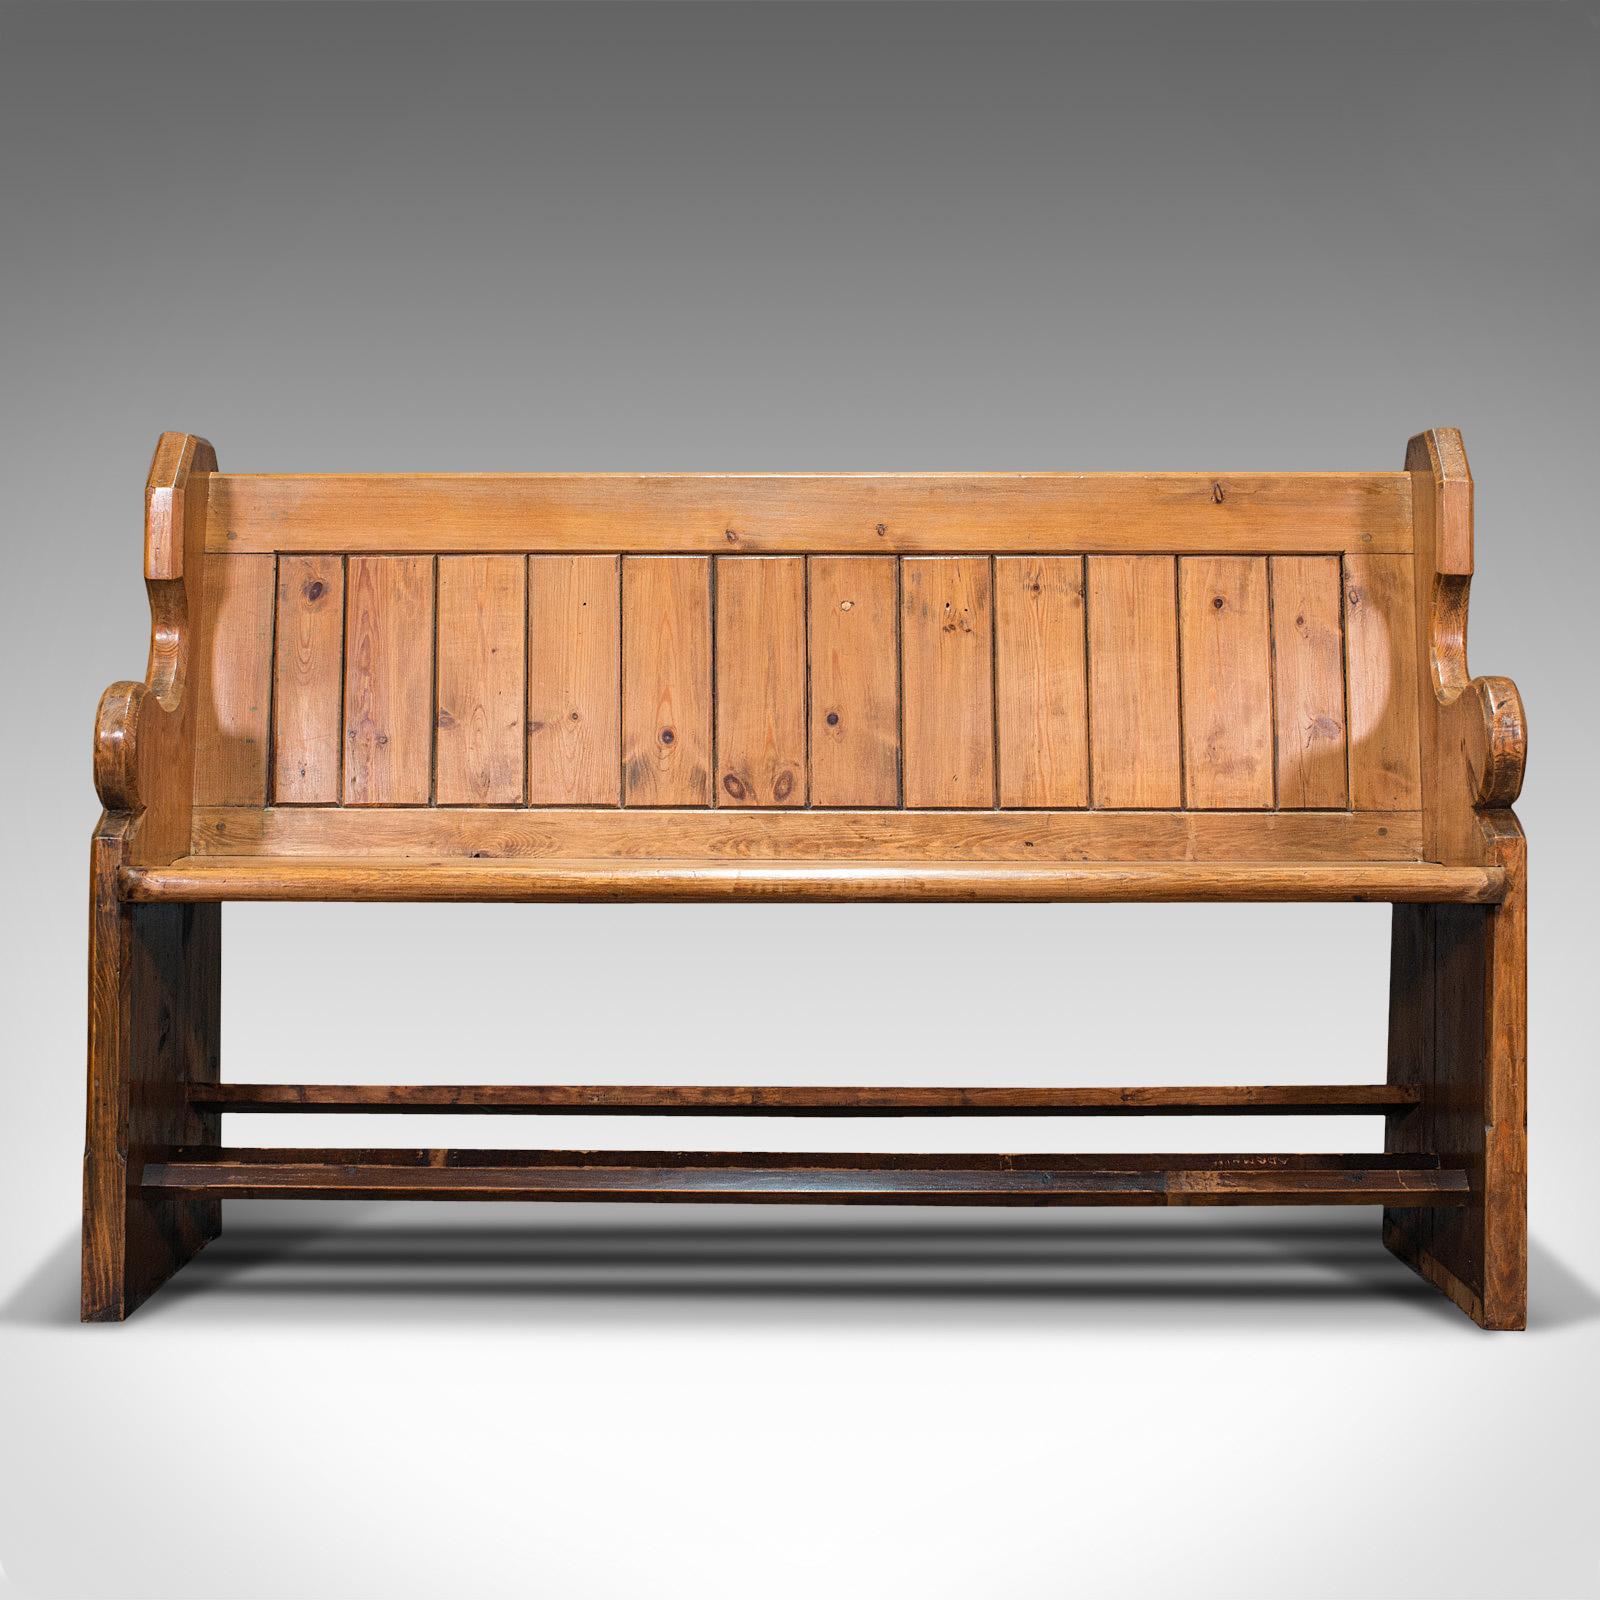 This is an antique hallway bench. An English, pine three-seat reception hall pew with ecclesiastic taste, dating to the late Victorian period, circa 1900.

Unwind upon this accommodating hallway bench for three
Displaying a desirable aged patina